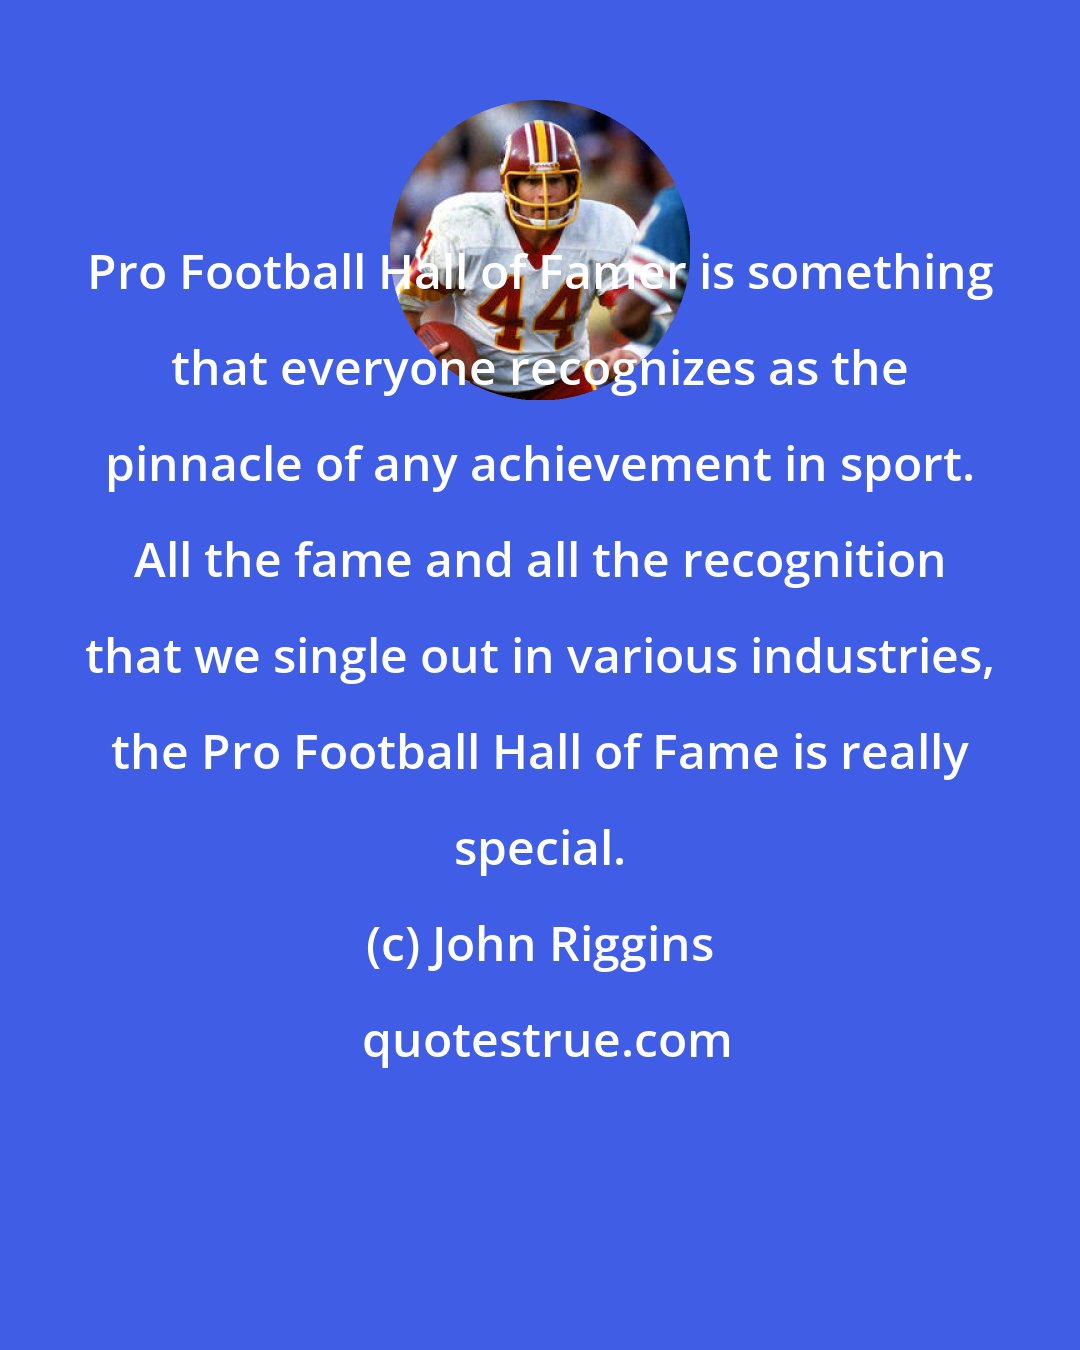 John Riggins: Pro Football Hall of Famer is something that everyone recognizes as the pinnacle of any achievement in sport. All the fame and all the recognition that we single out in various industries, the Pro Football Hall of Fame is really special.